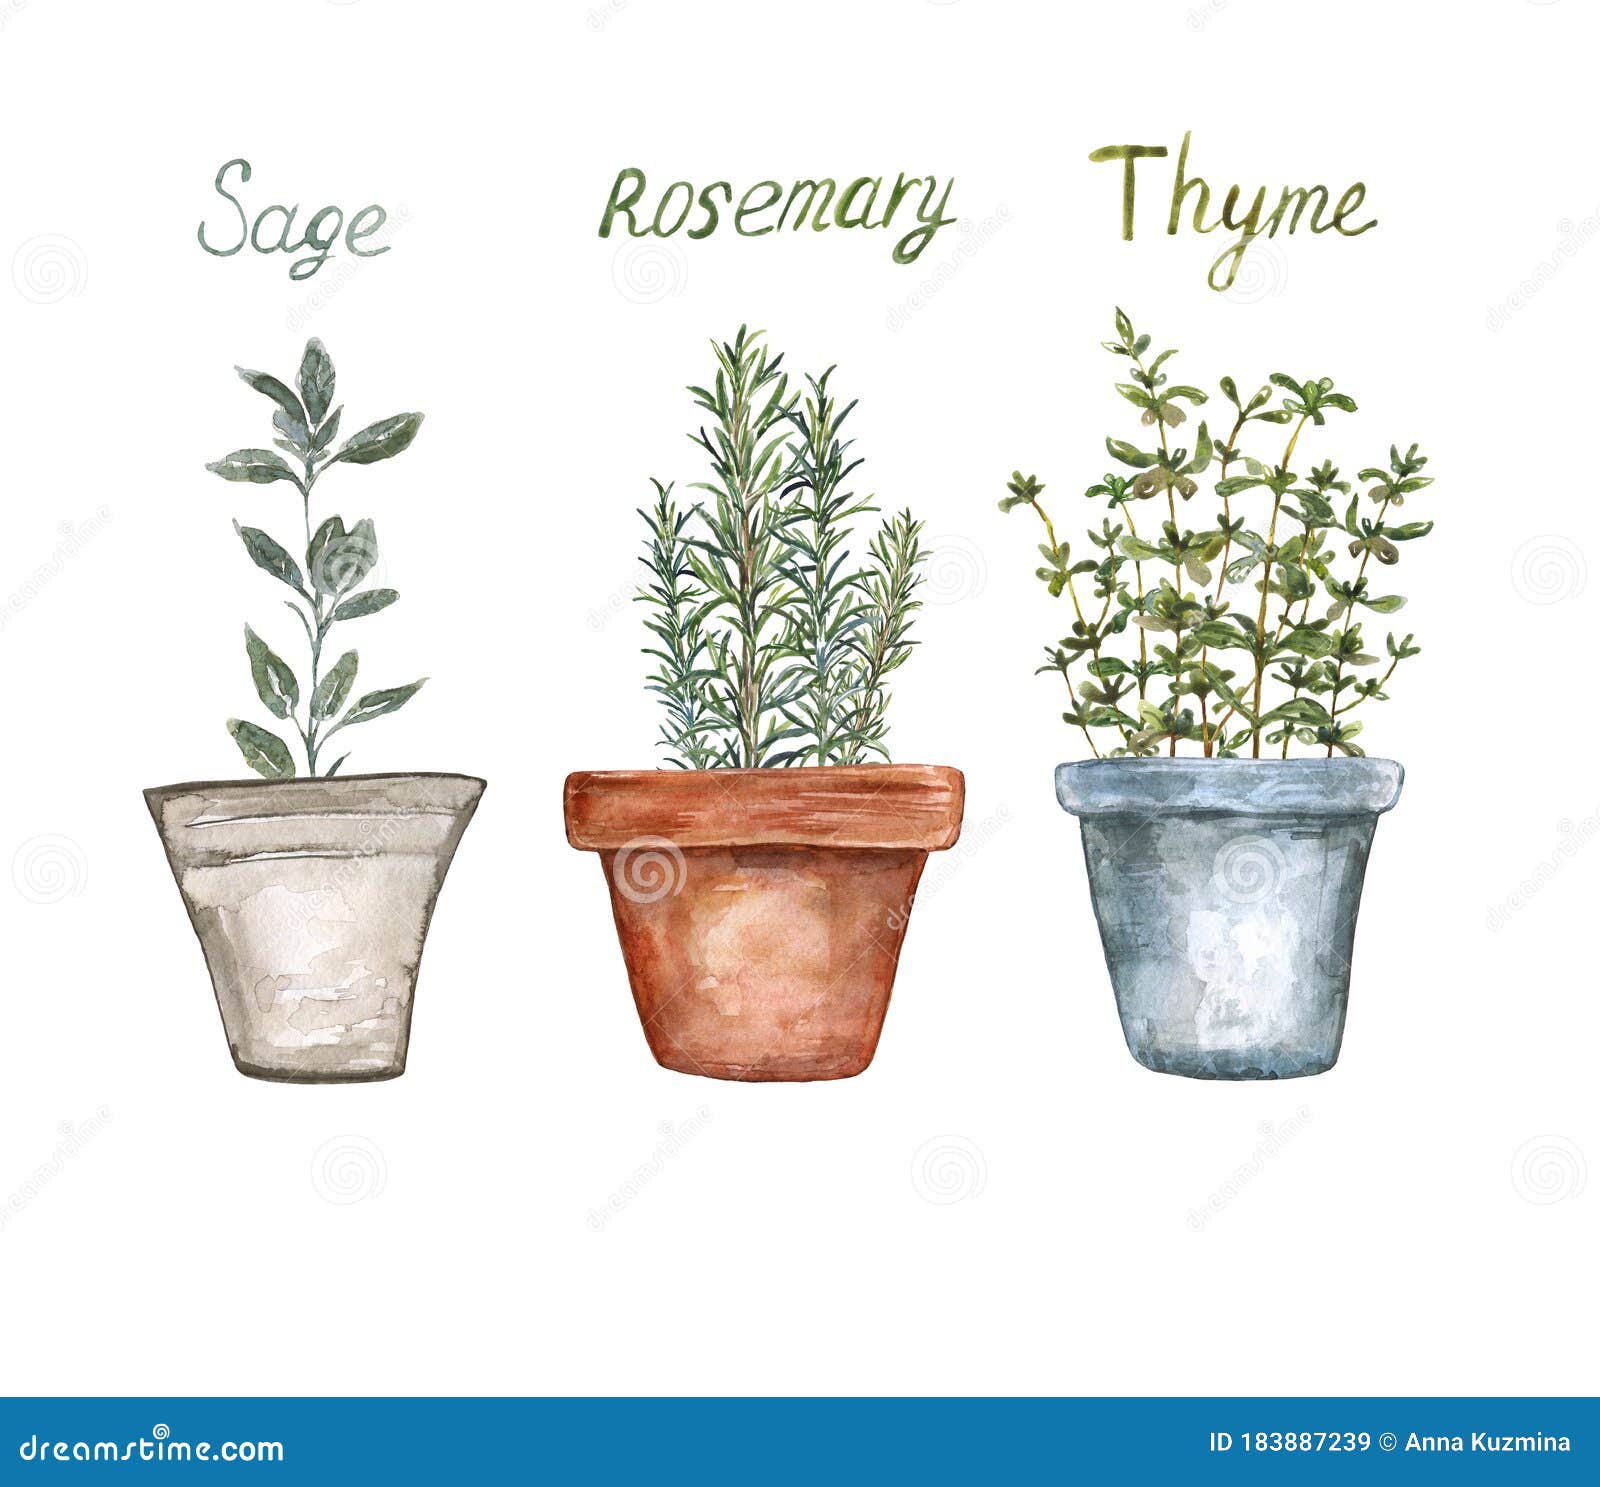 watercolor kitchen culinary herb plants . rosemary, sage, thyme in pots,  on white background. botanical art